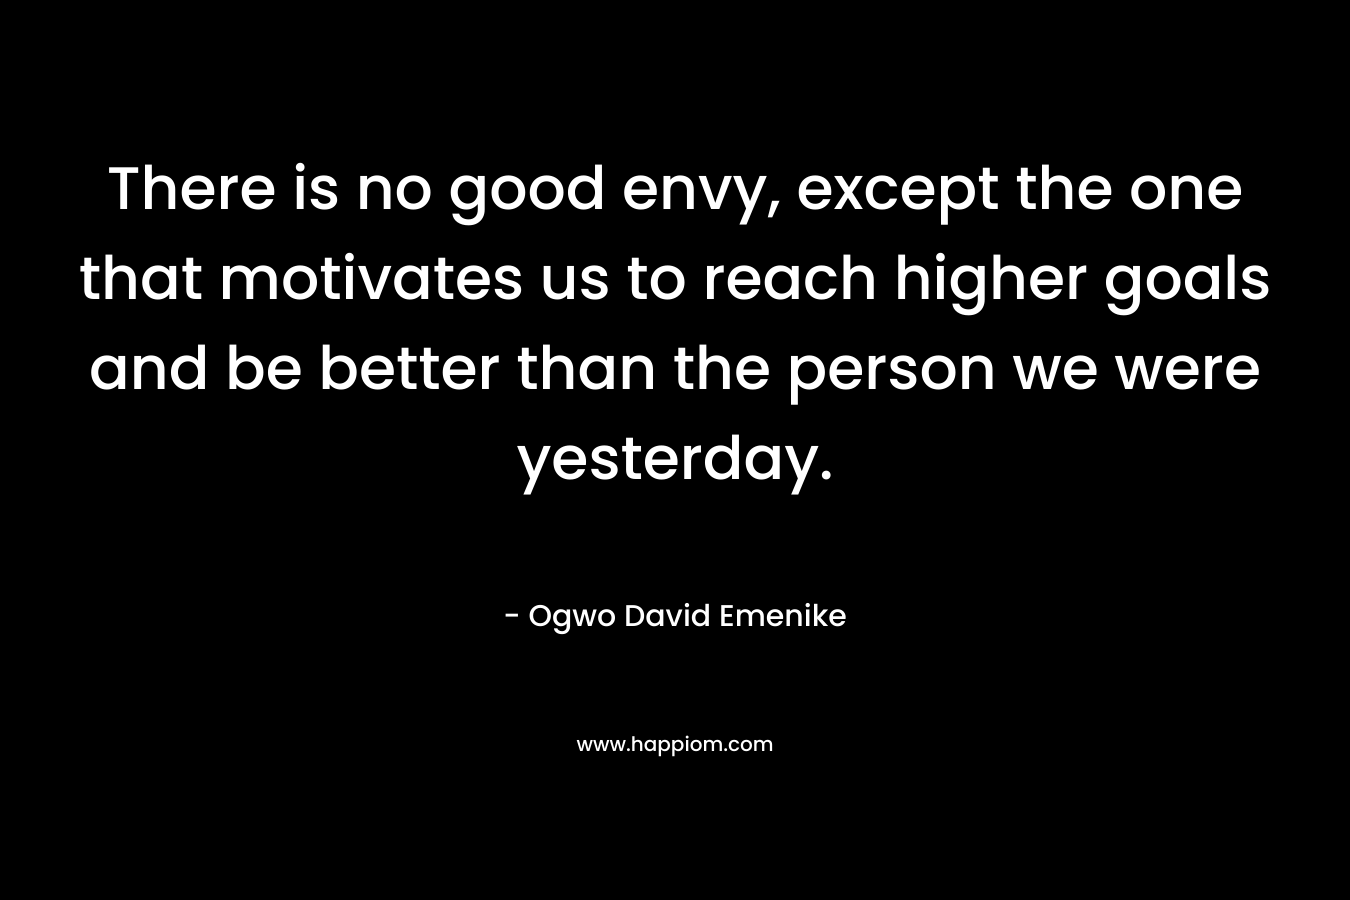 There is no good envy, except the one that motivates us to reach higher goals and be better than the person we were yesterday. – Ogwo David Emenike